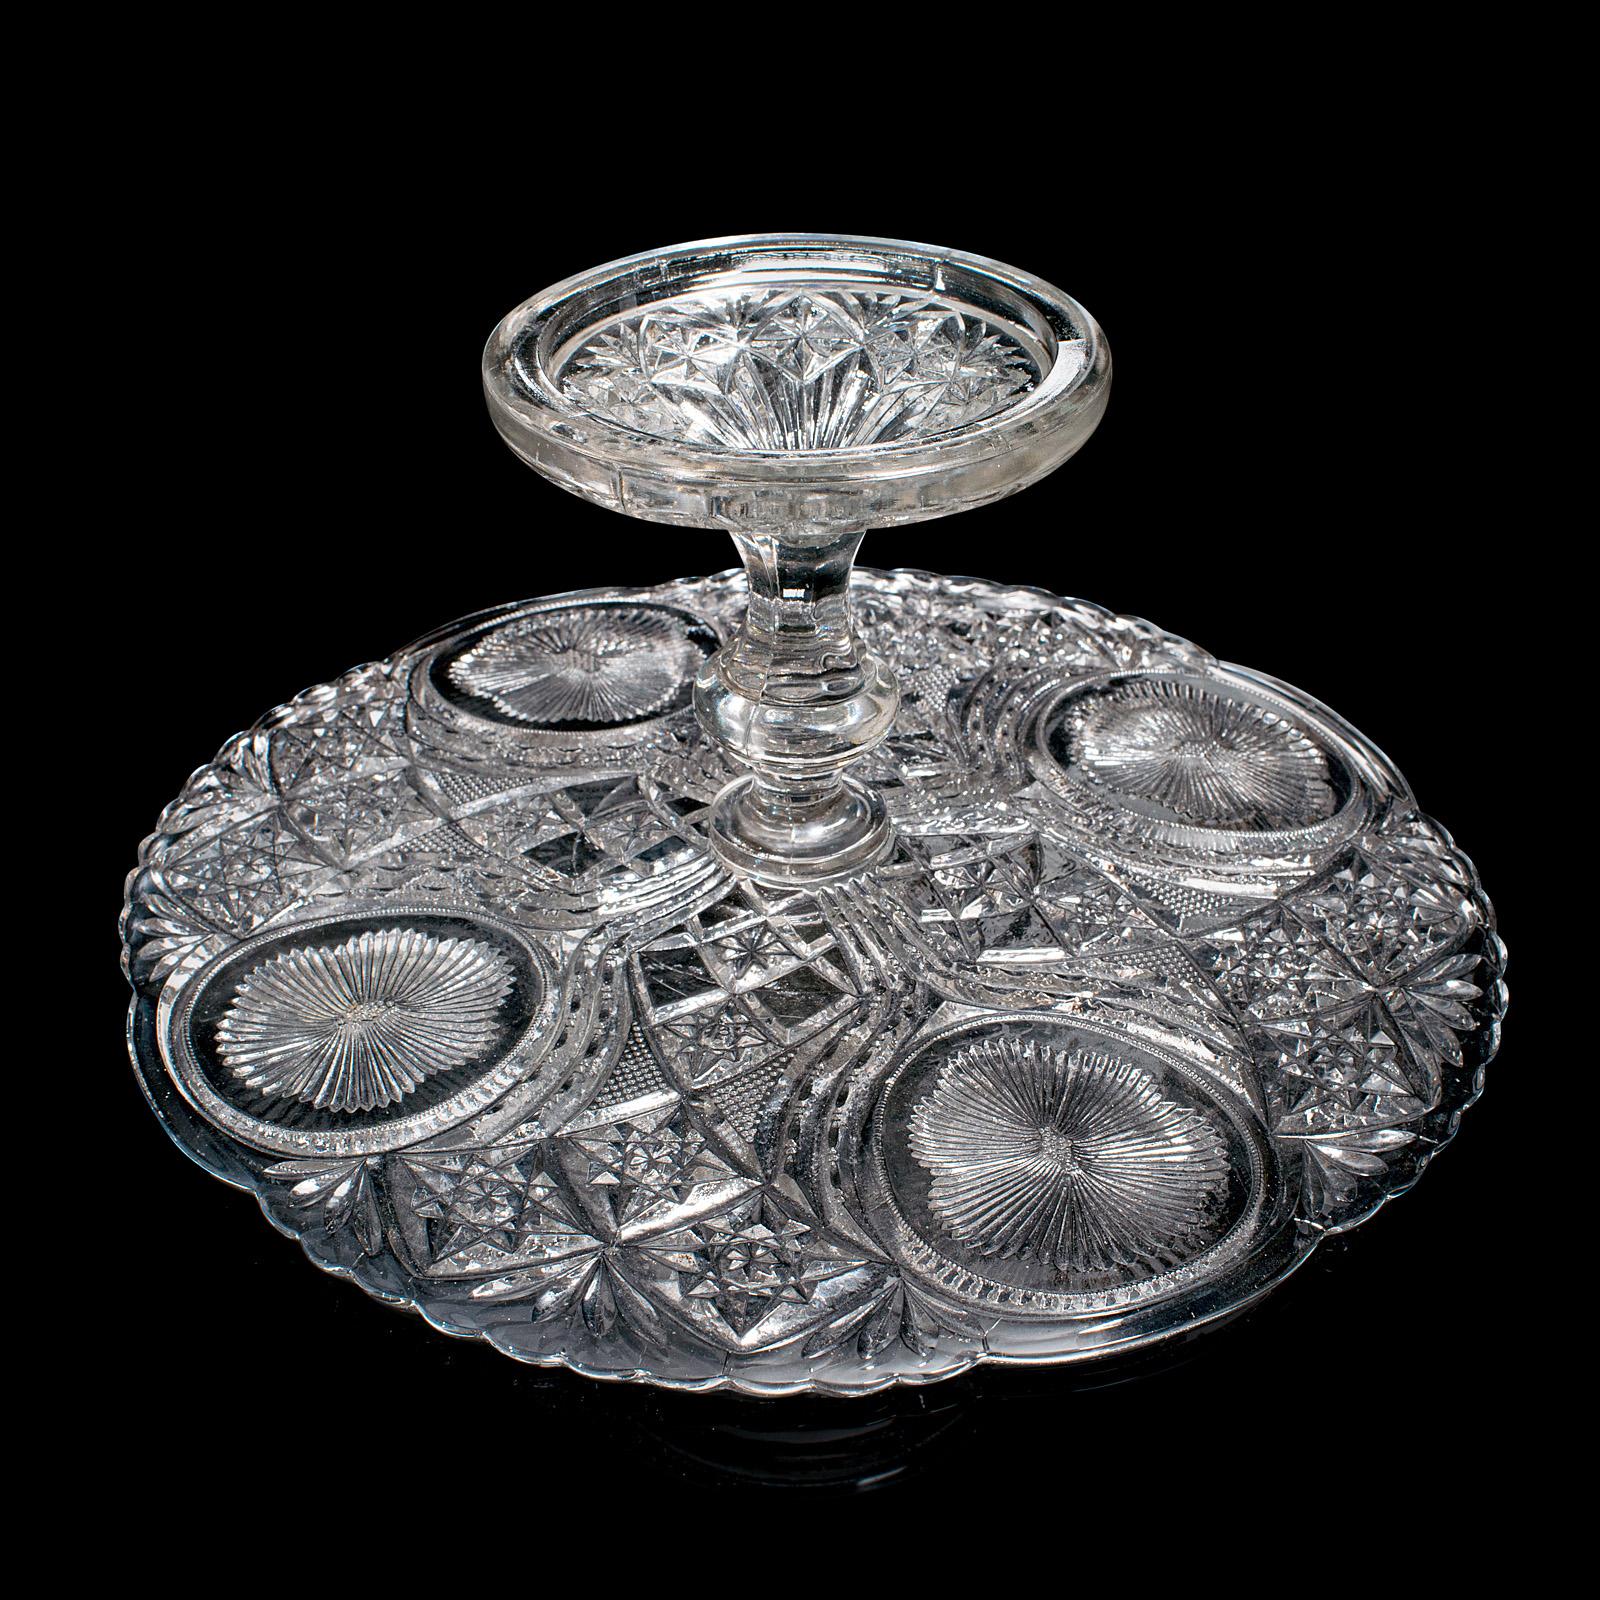 Vintage Cake Stand, French, Cut Glass, Afternoon Tea Serving Platter, Circa 1950 For Sale 2